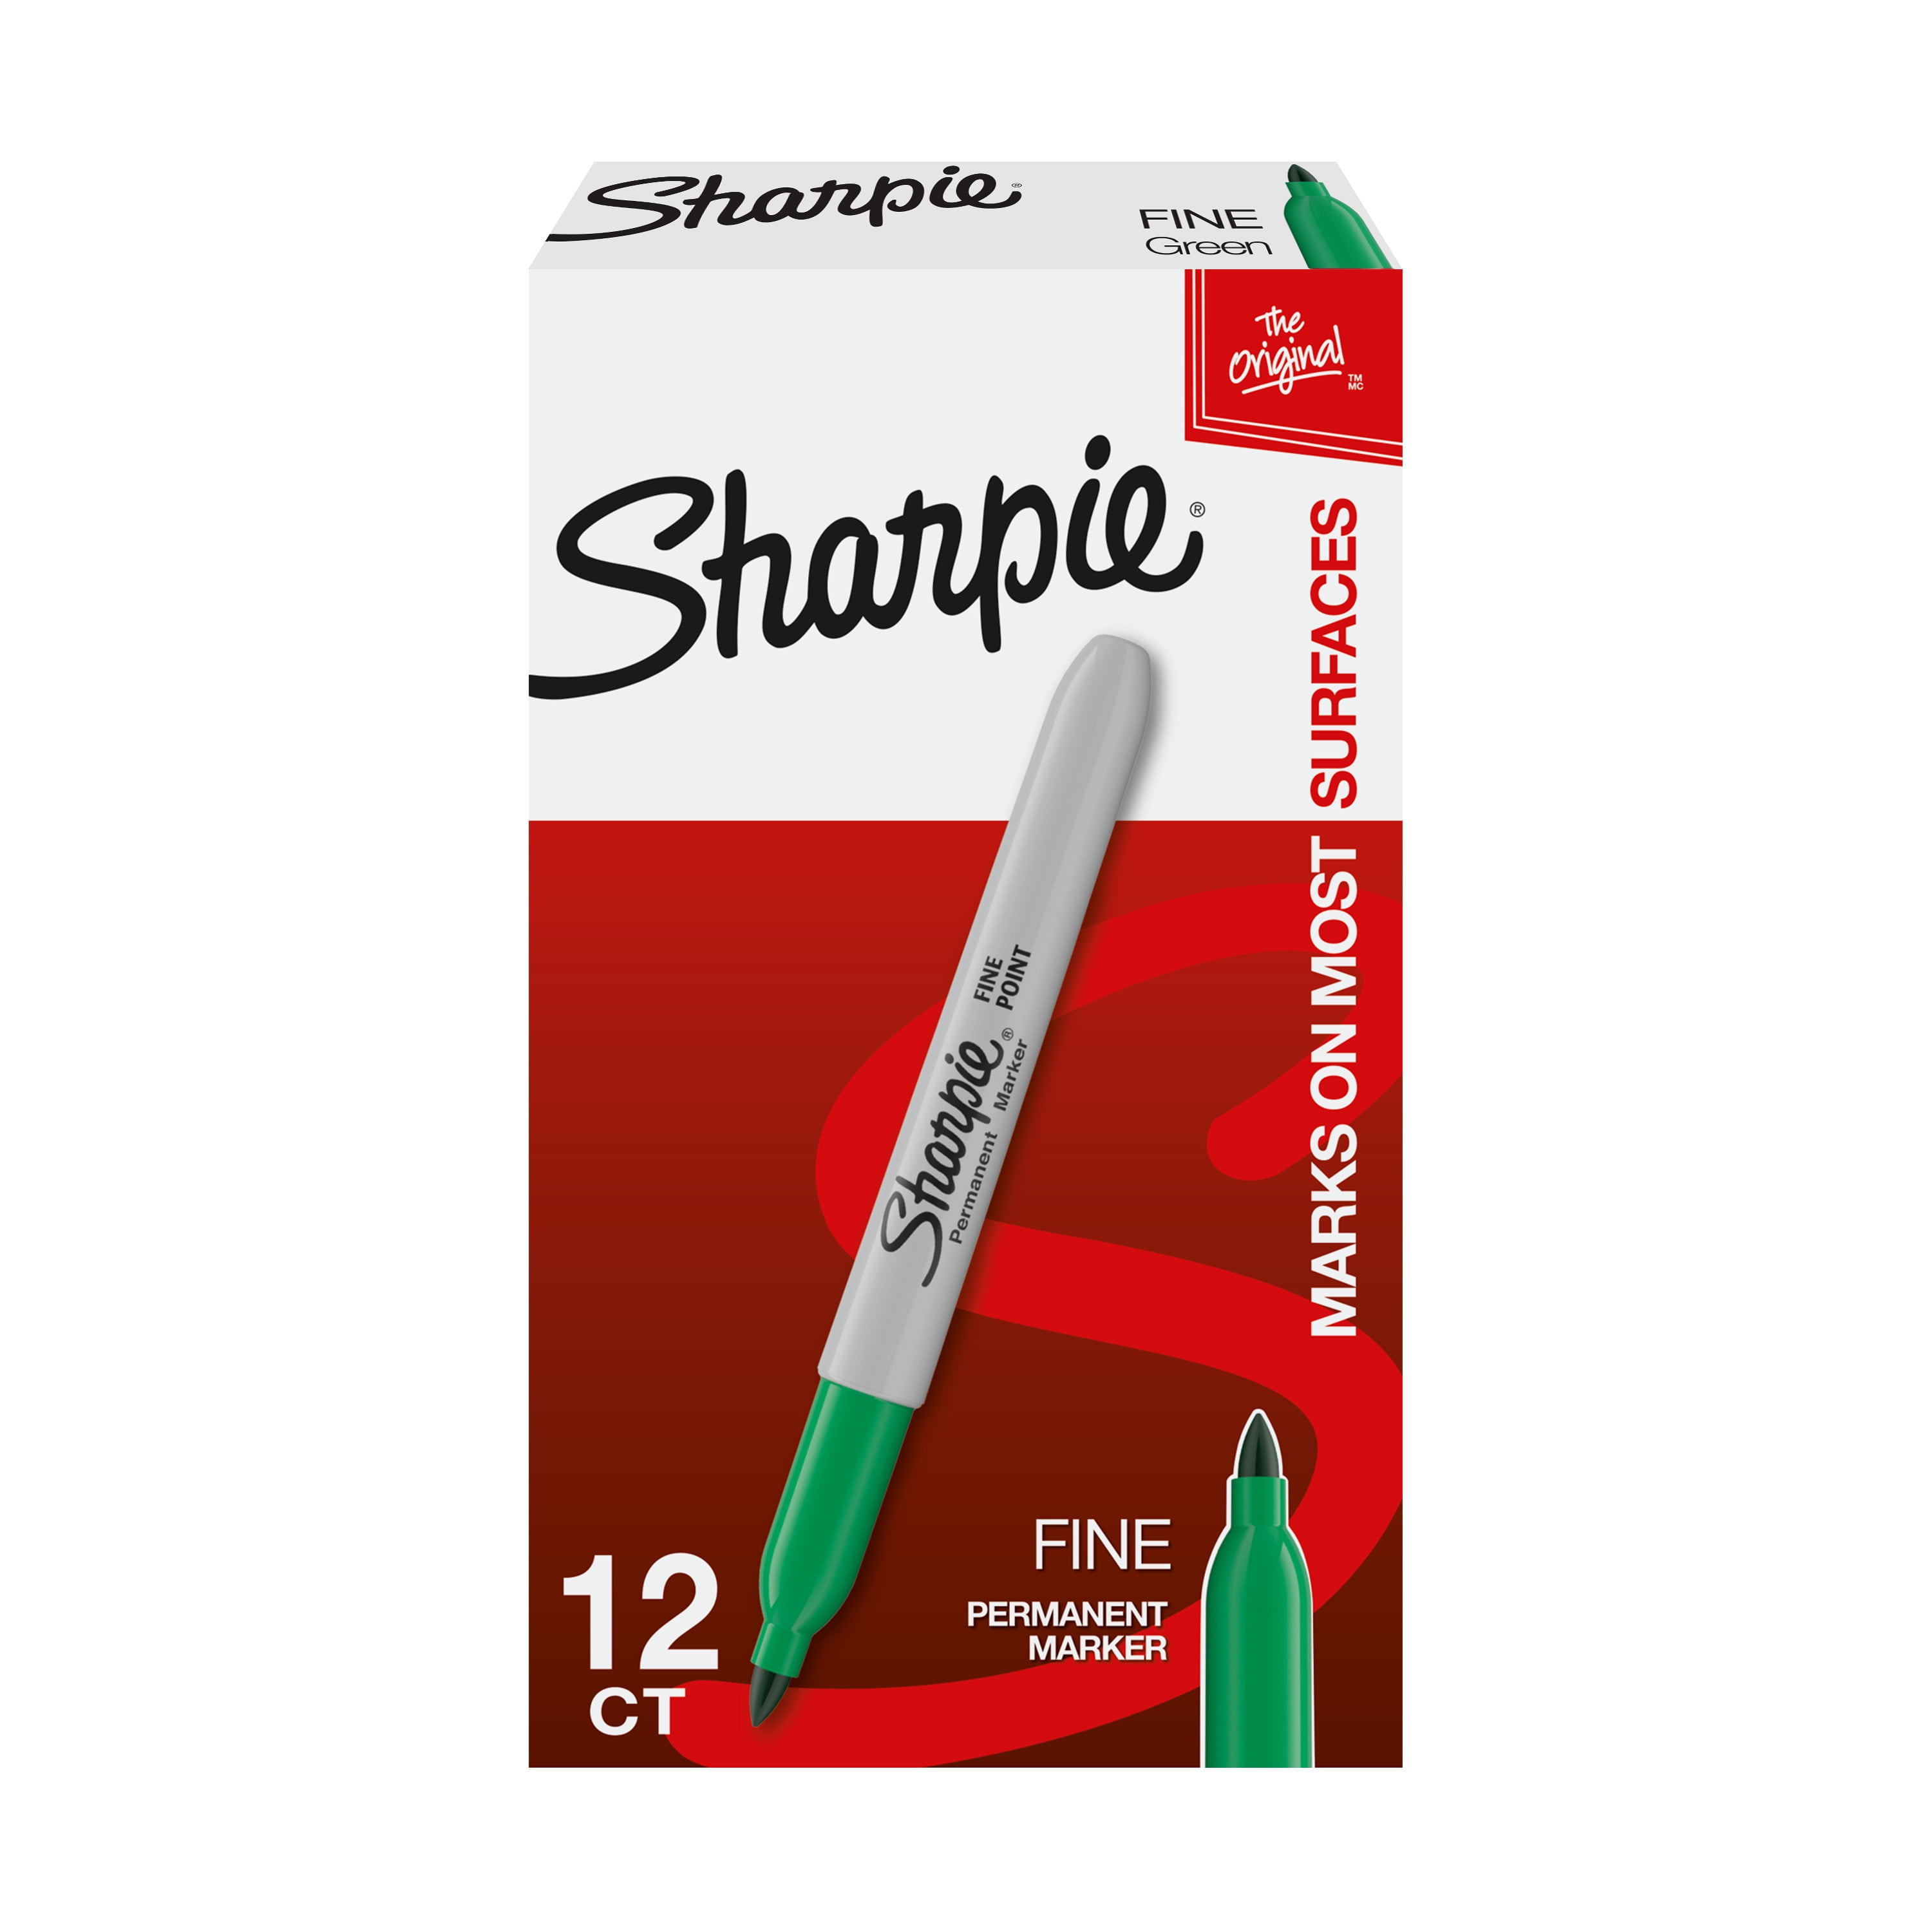 Children's day set a fire psychology Sharpie Permanent Marker, Fine Point, 12-Pack, Available in Multiple Colors  - Walmart.com